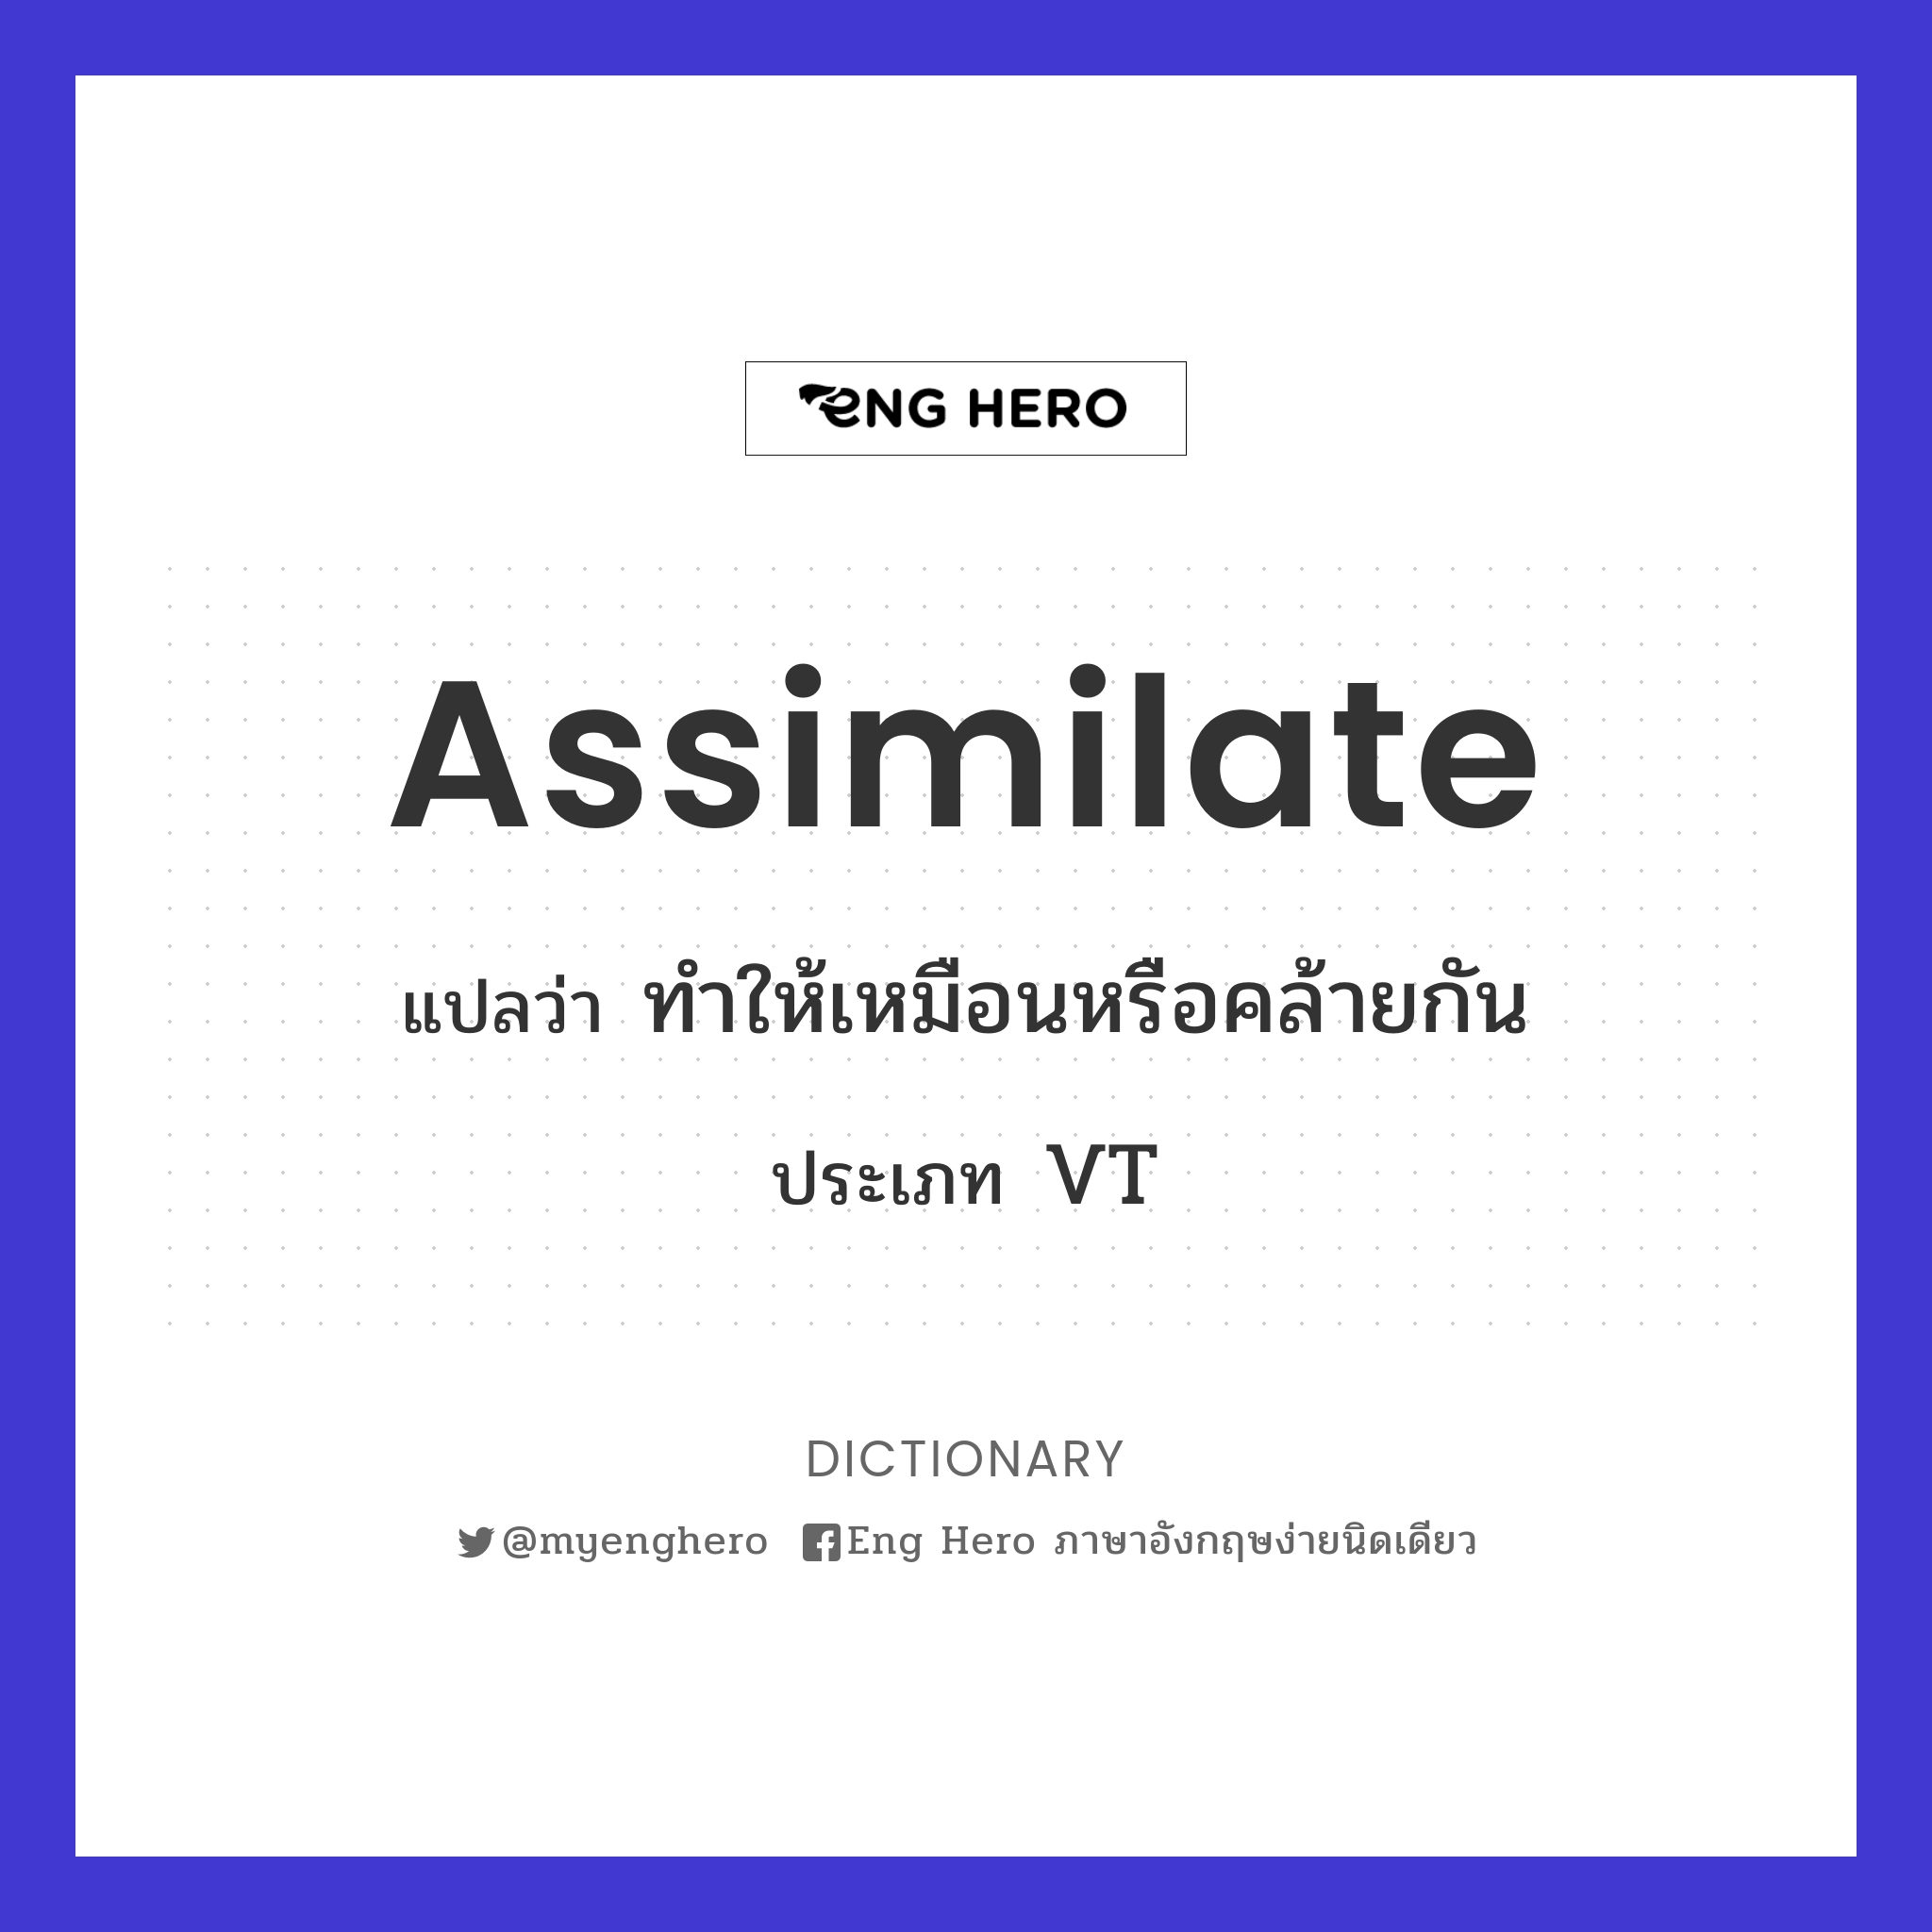 assimilate